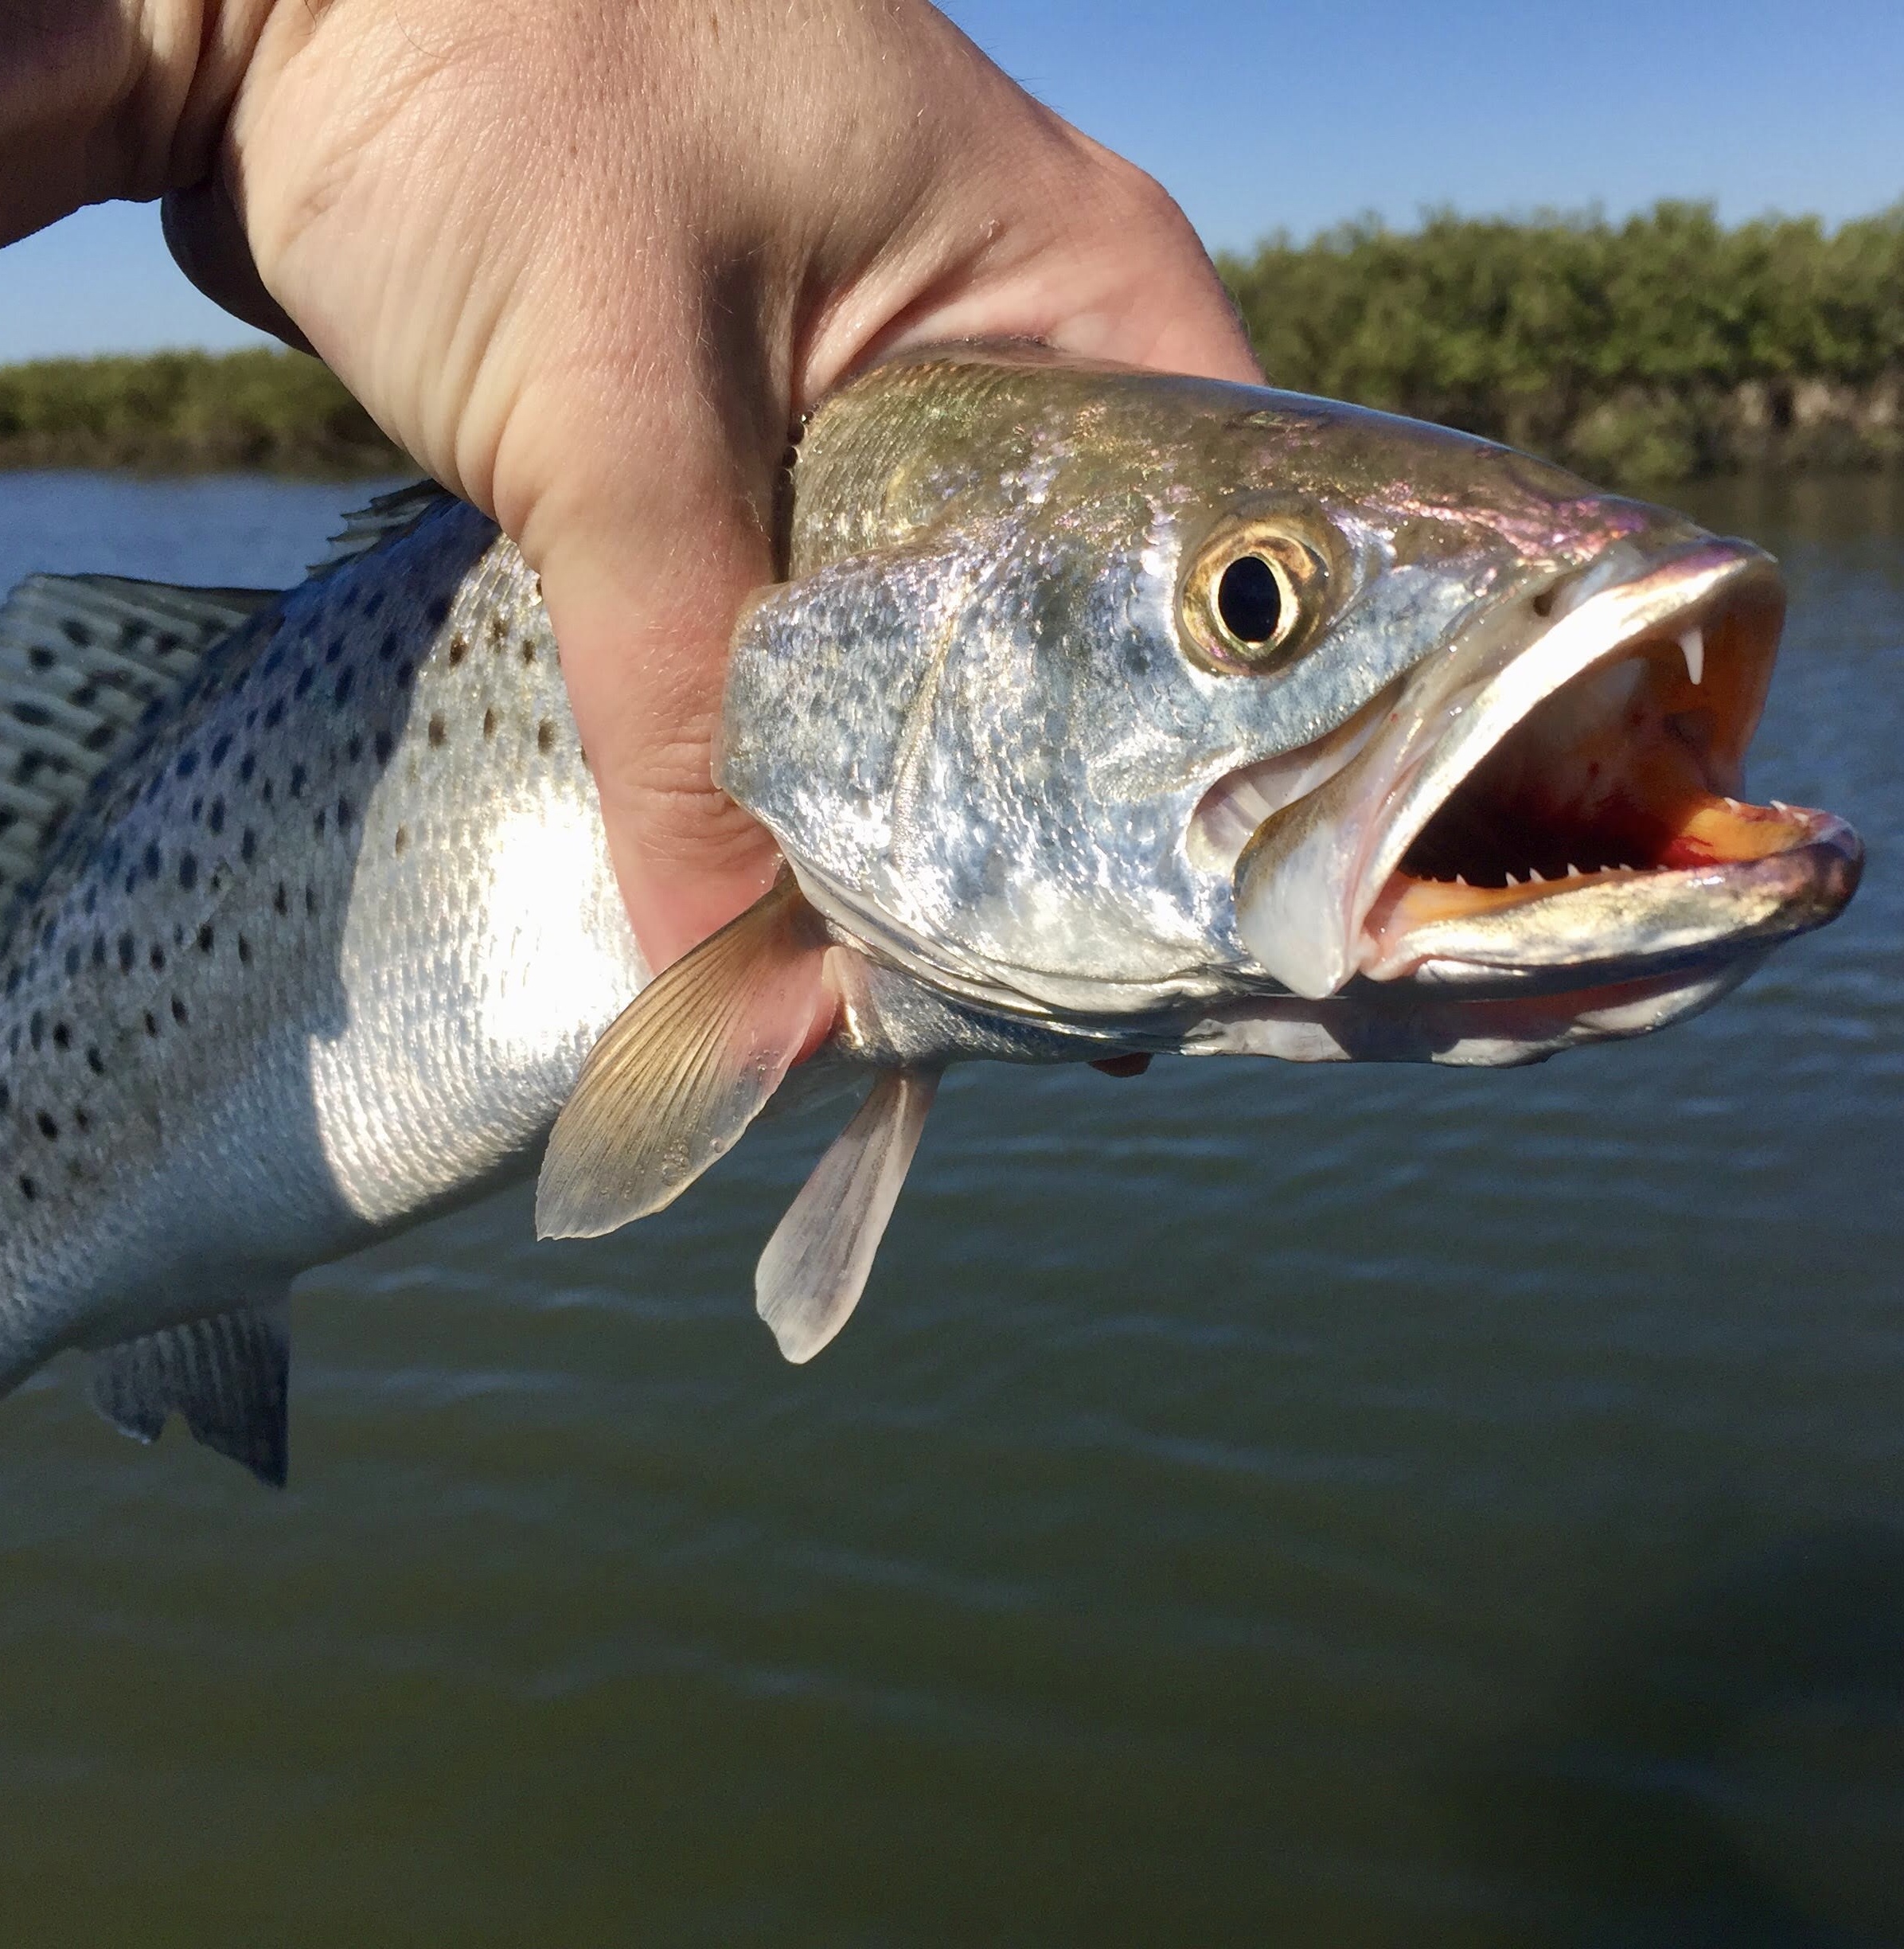 Texas speckled trout limit set to move to five coastwide